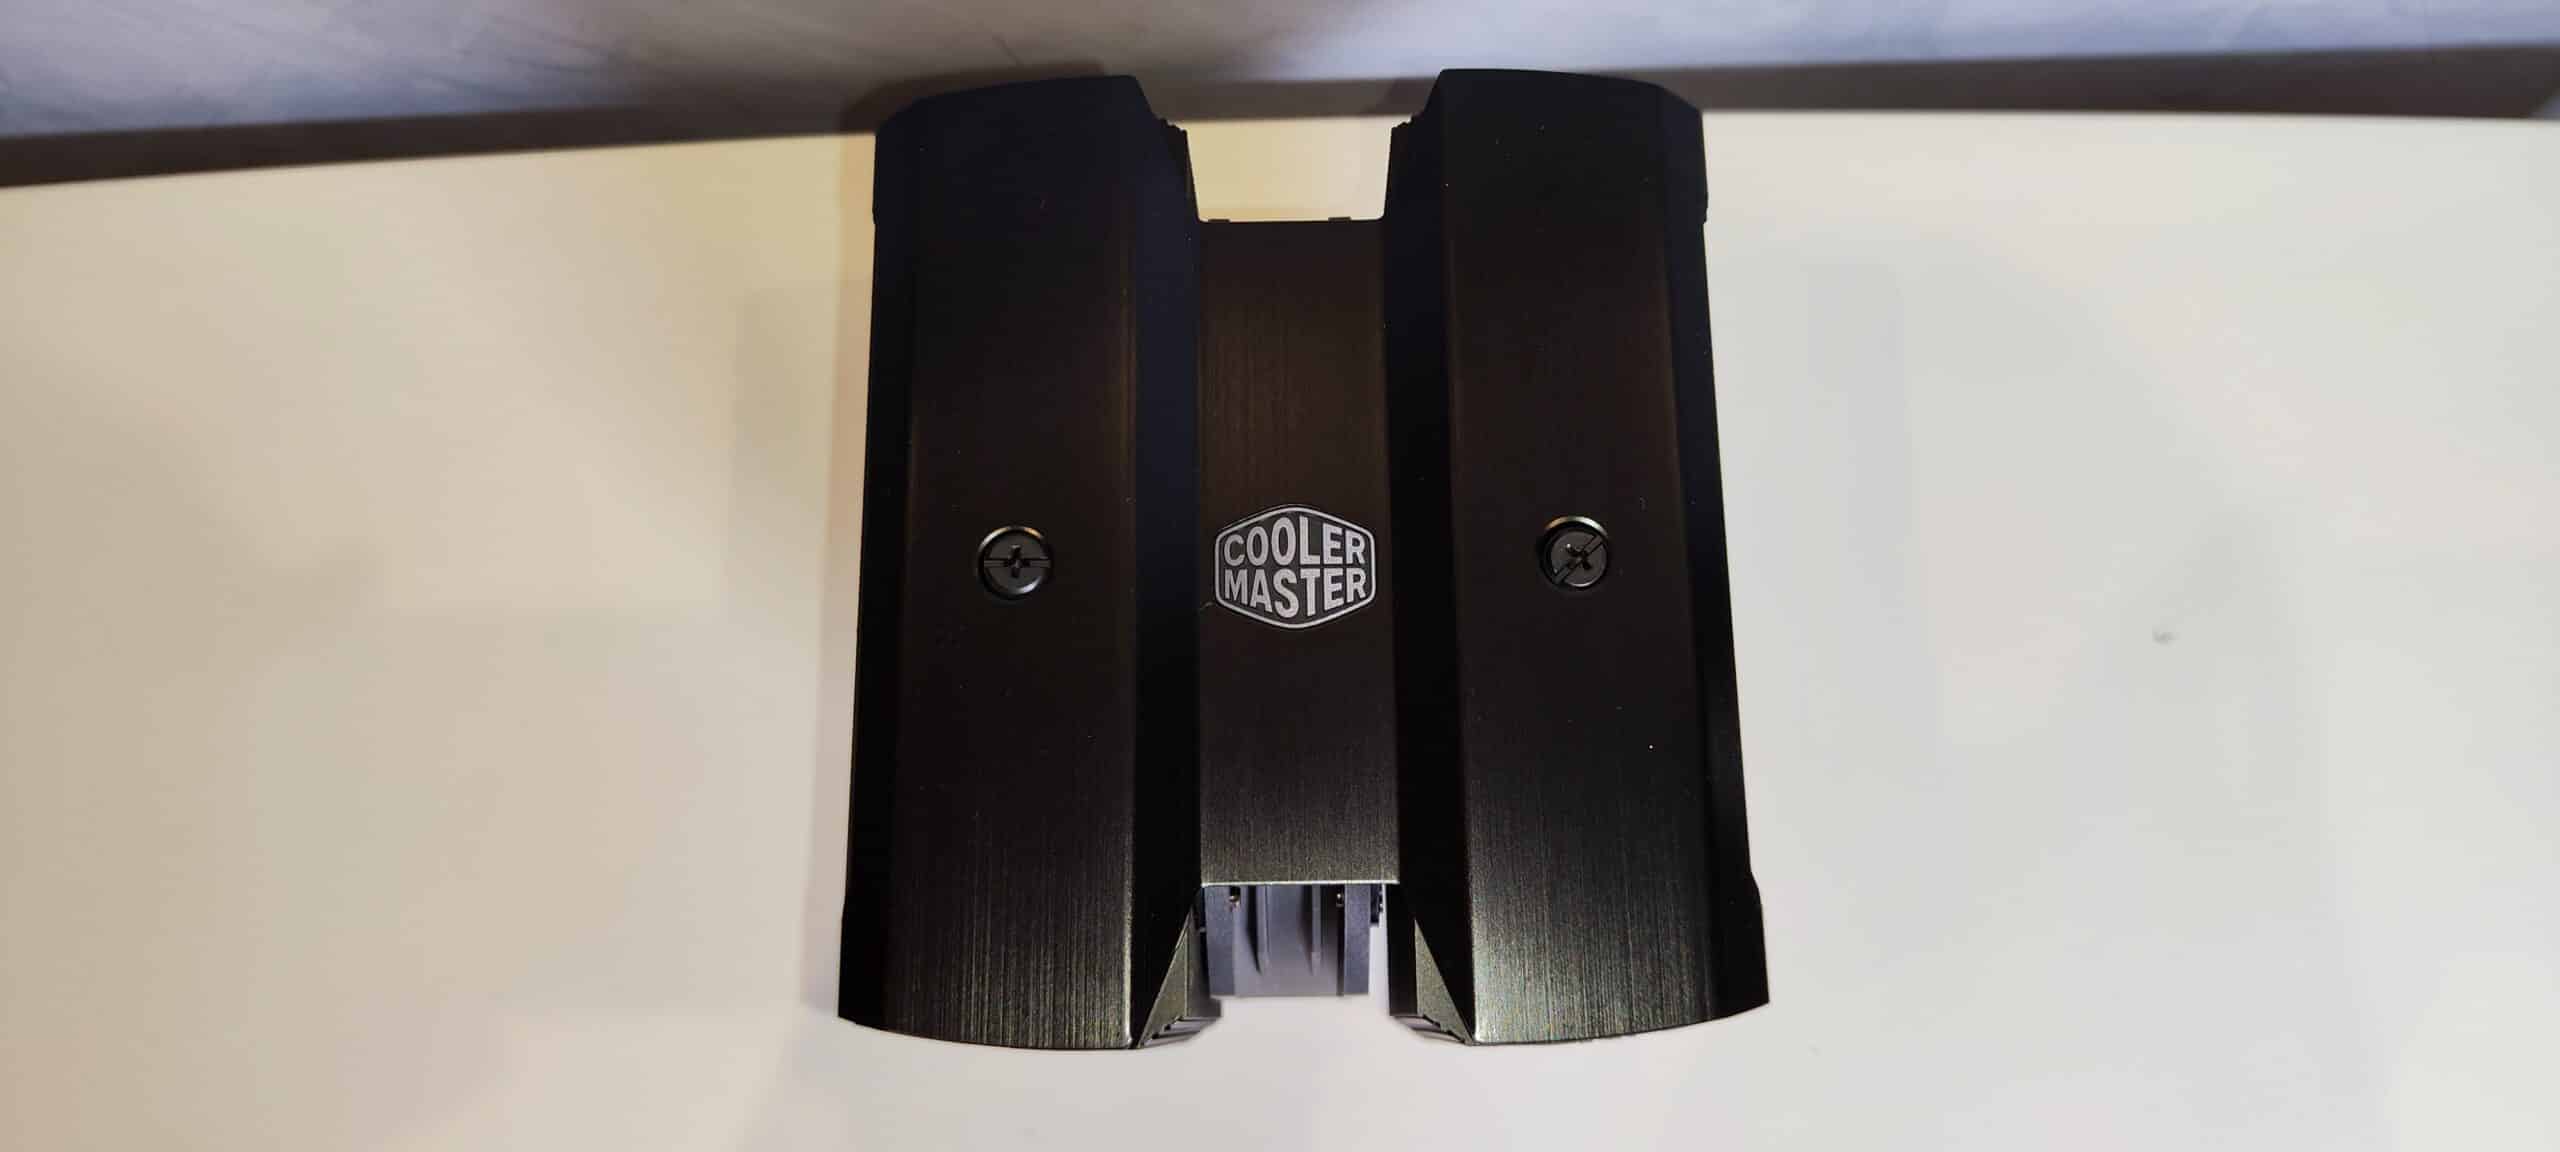 Cooler Master MasterAir M824 Stealth 6 scaled